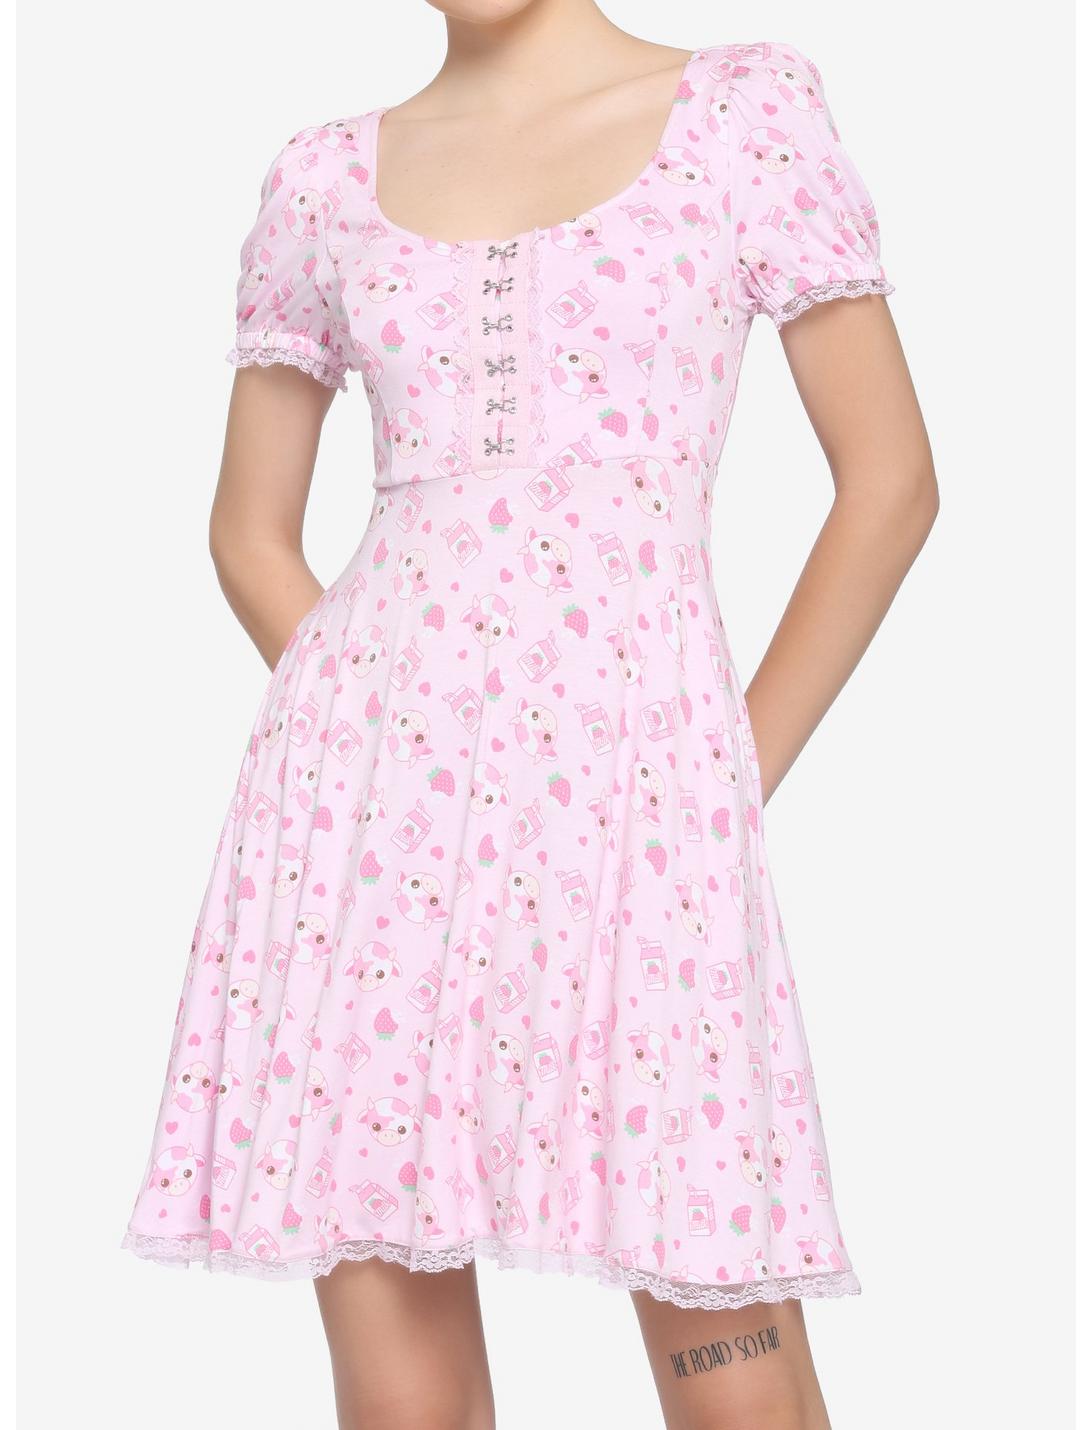 Strawberry Cow Henley Dress | Hot Topic